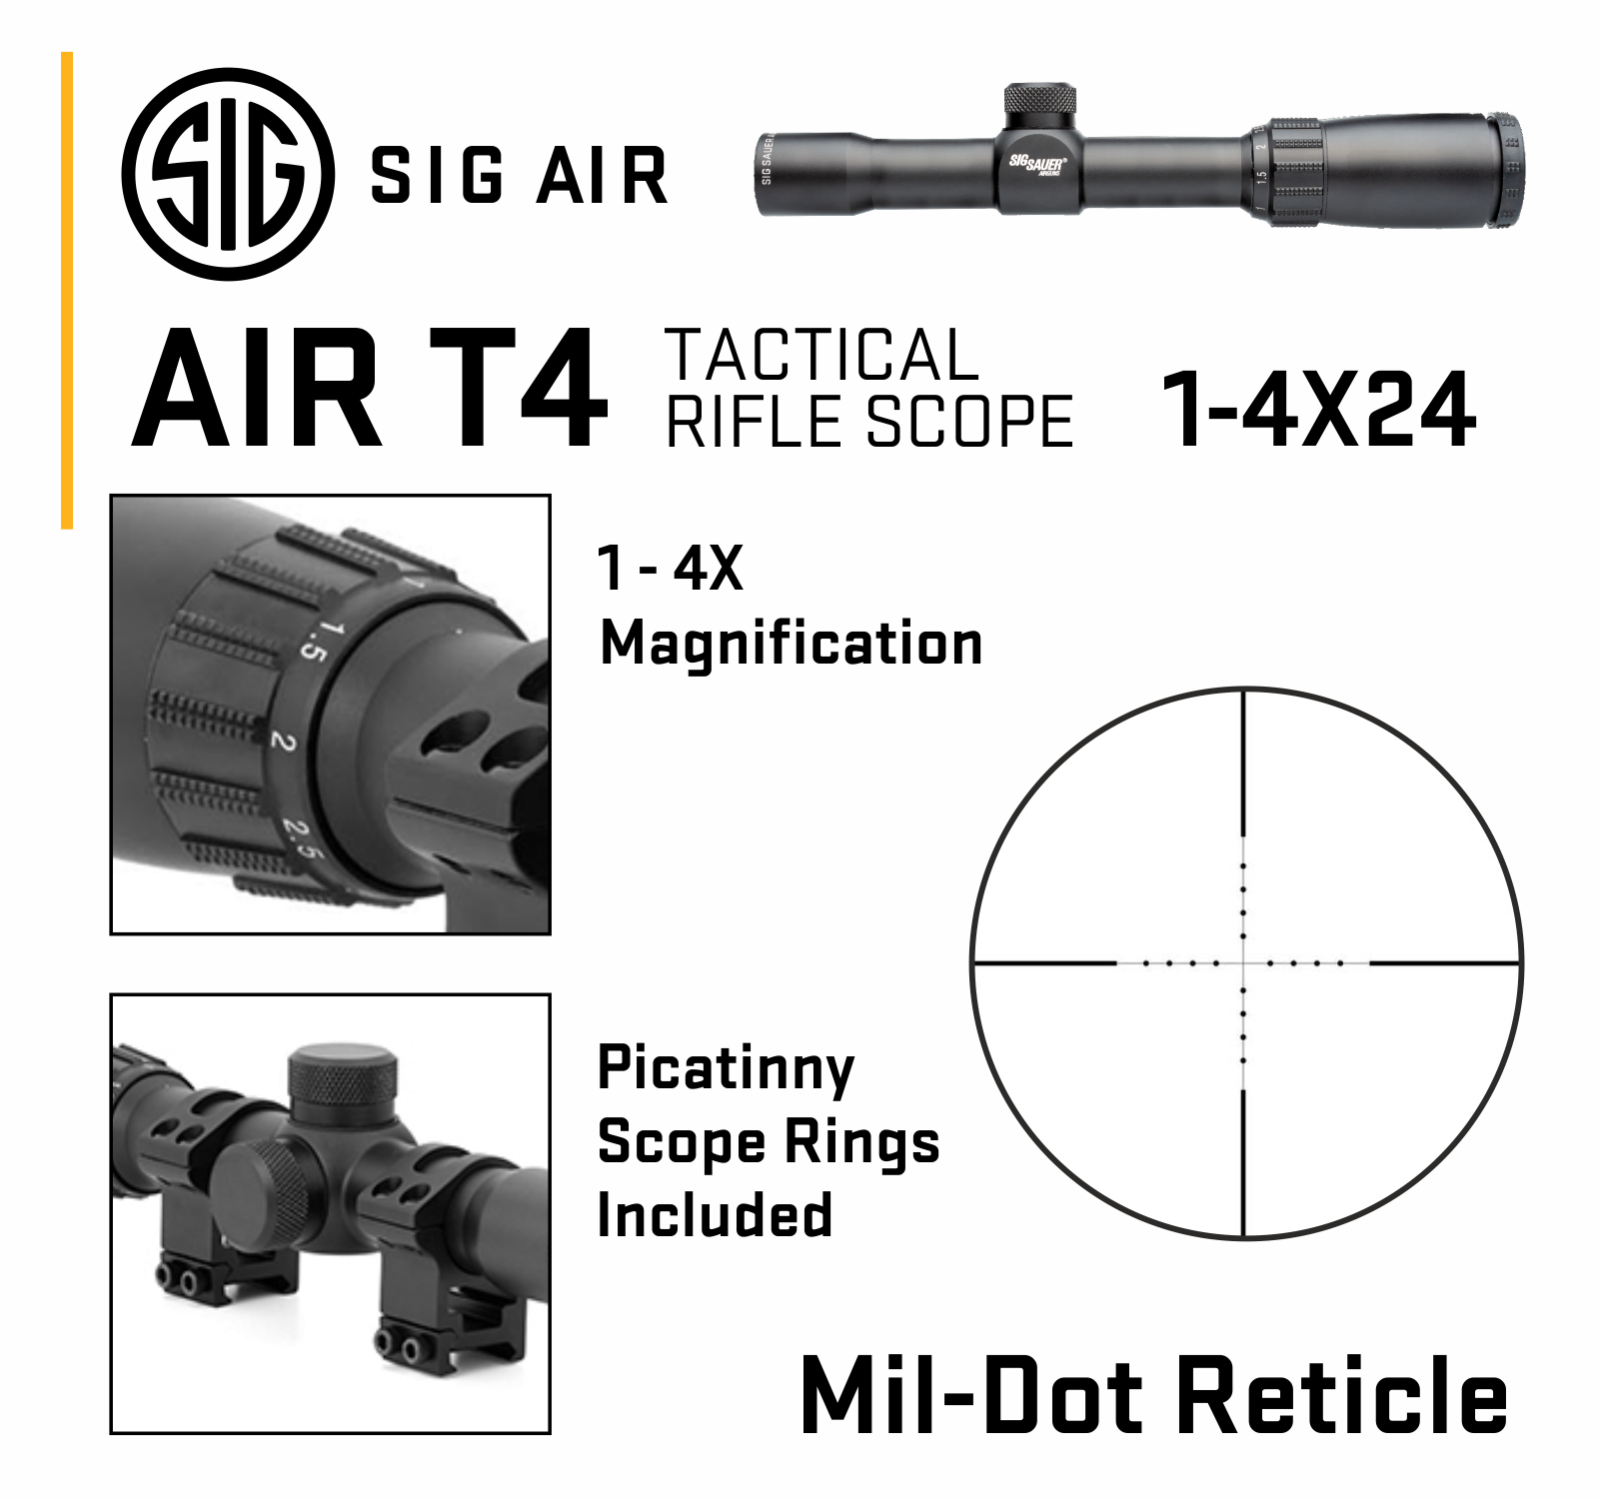 SIG SAUER Sig Sauer AIR T4 Rifle Scope 1-4x24 MIL Dot Reticle sight